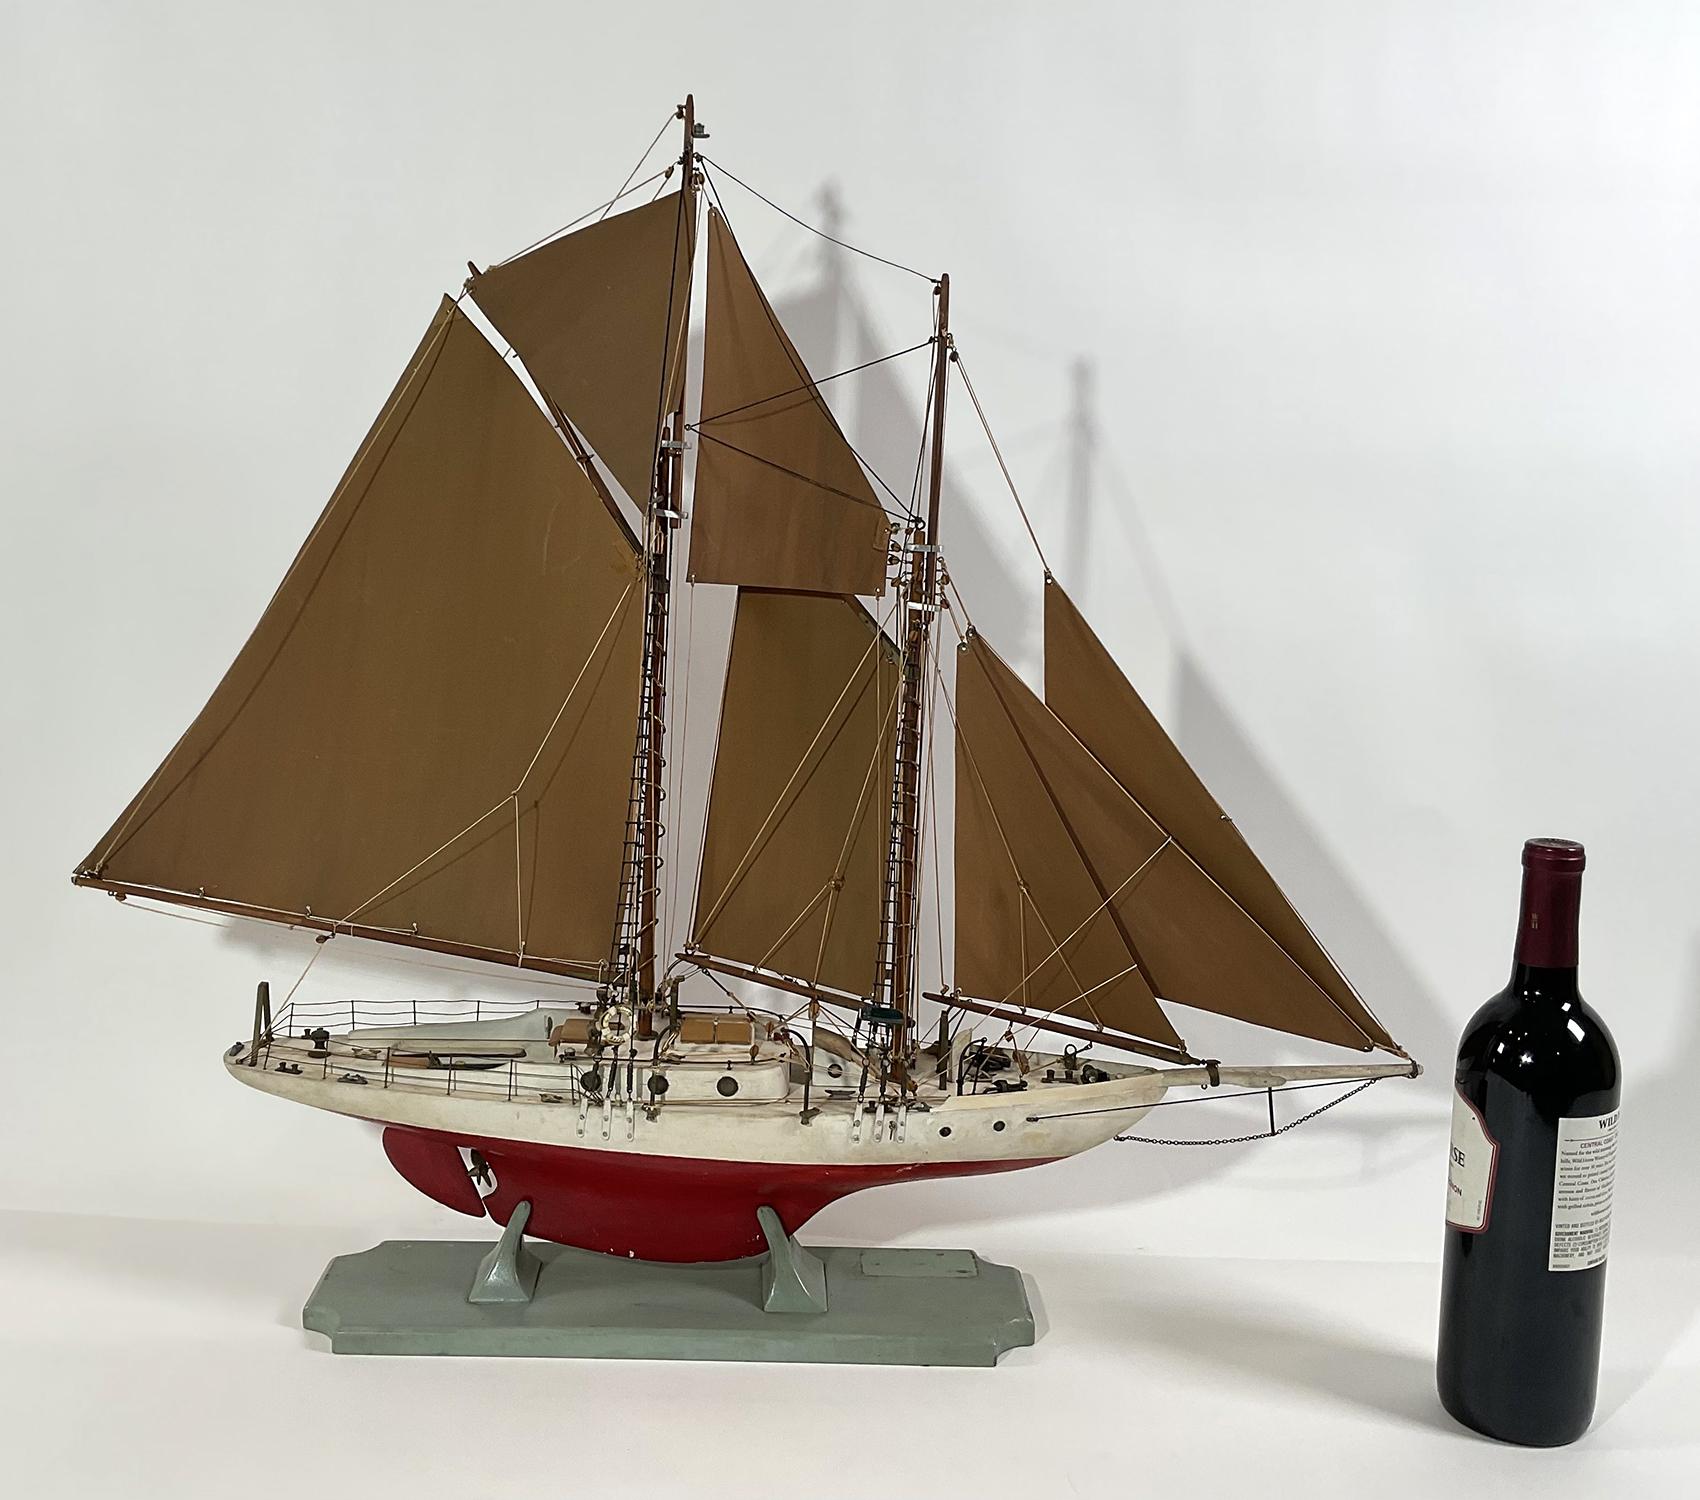 North American Antique Model of a Two Masted Schooner